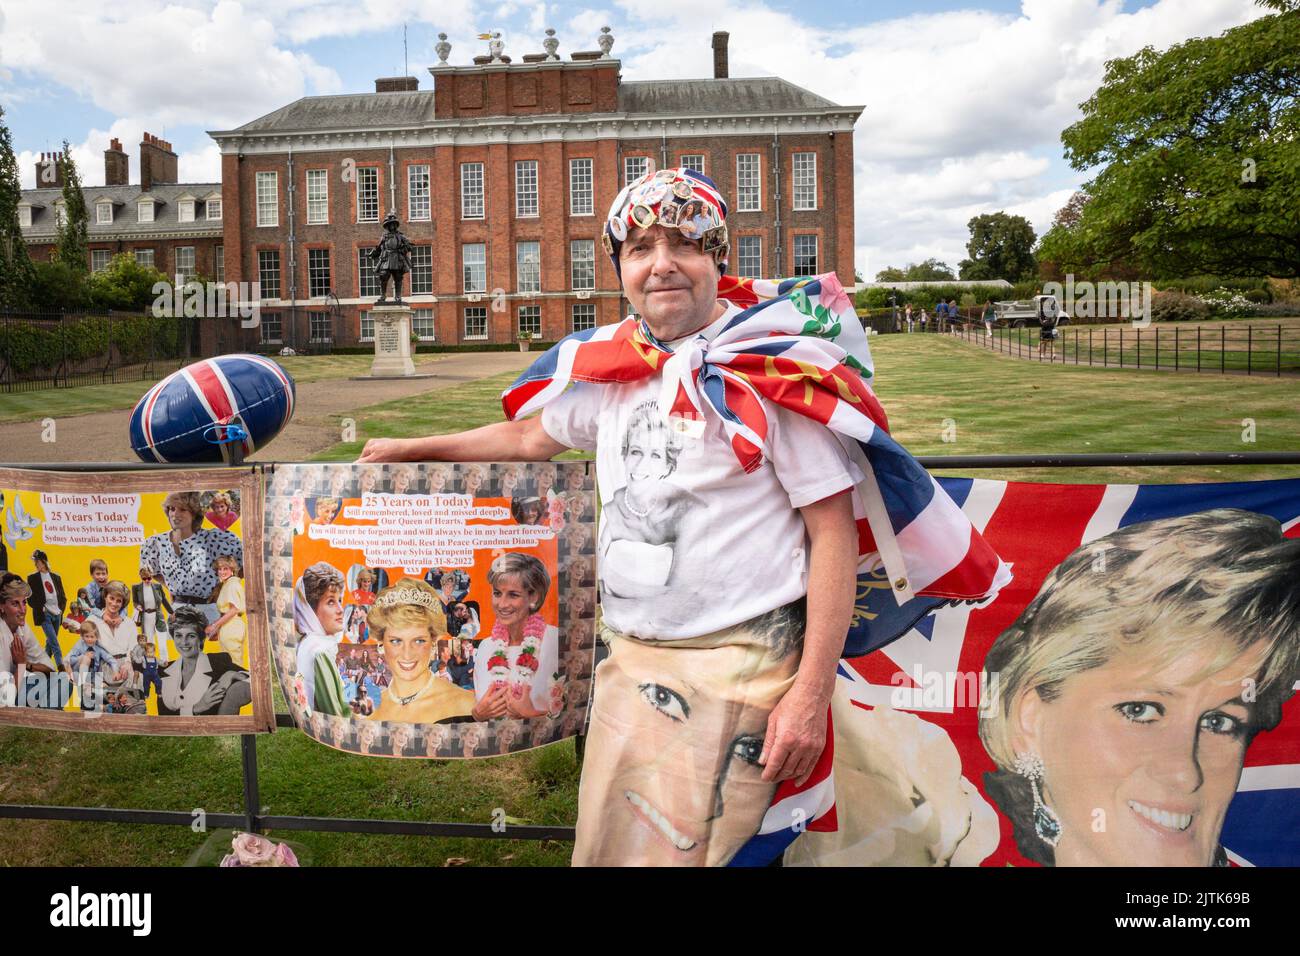 London, UK. 31st Aug, 2022. Royal Superfan John has come to remember Diana. Royal fans and visitors gather at the gates to Kensington Palace to commemorate the 25th anniversary of th tragic death of Diana Princess of Wales. Credit: Imageplotter/Alamy Live News Stock Photo